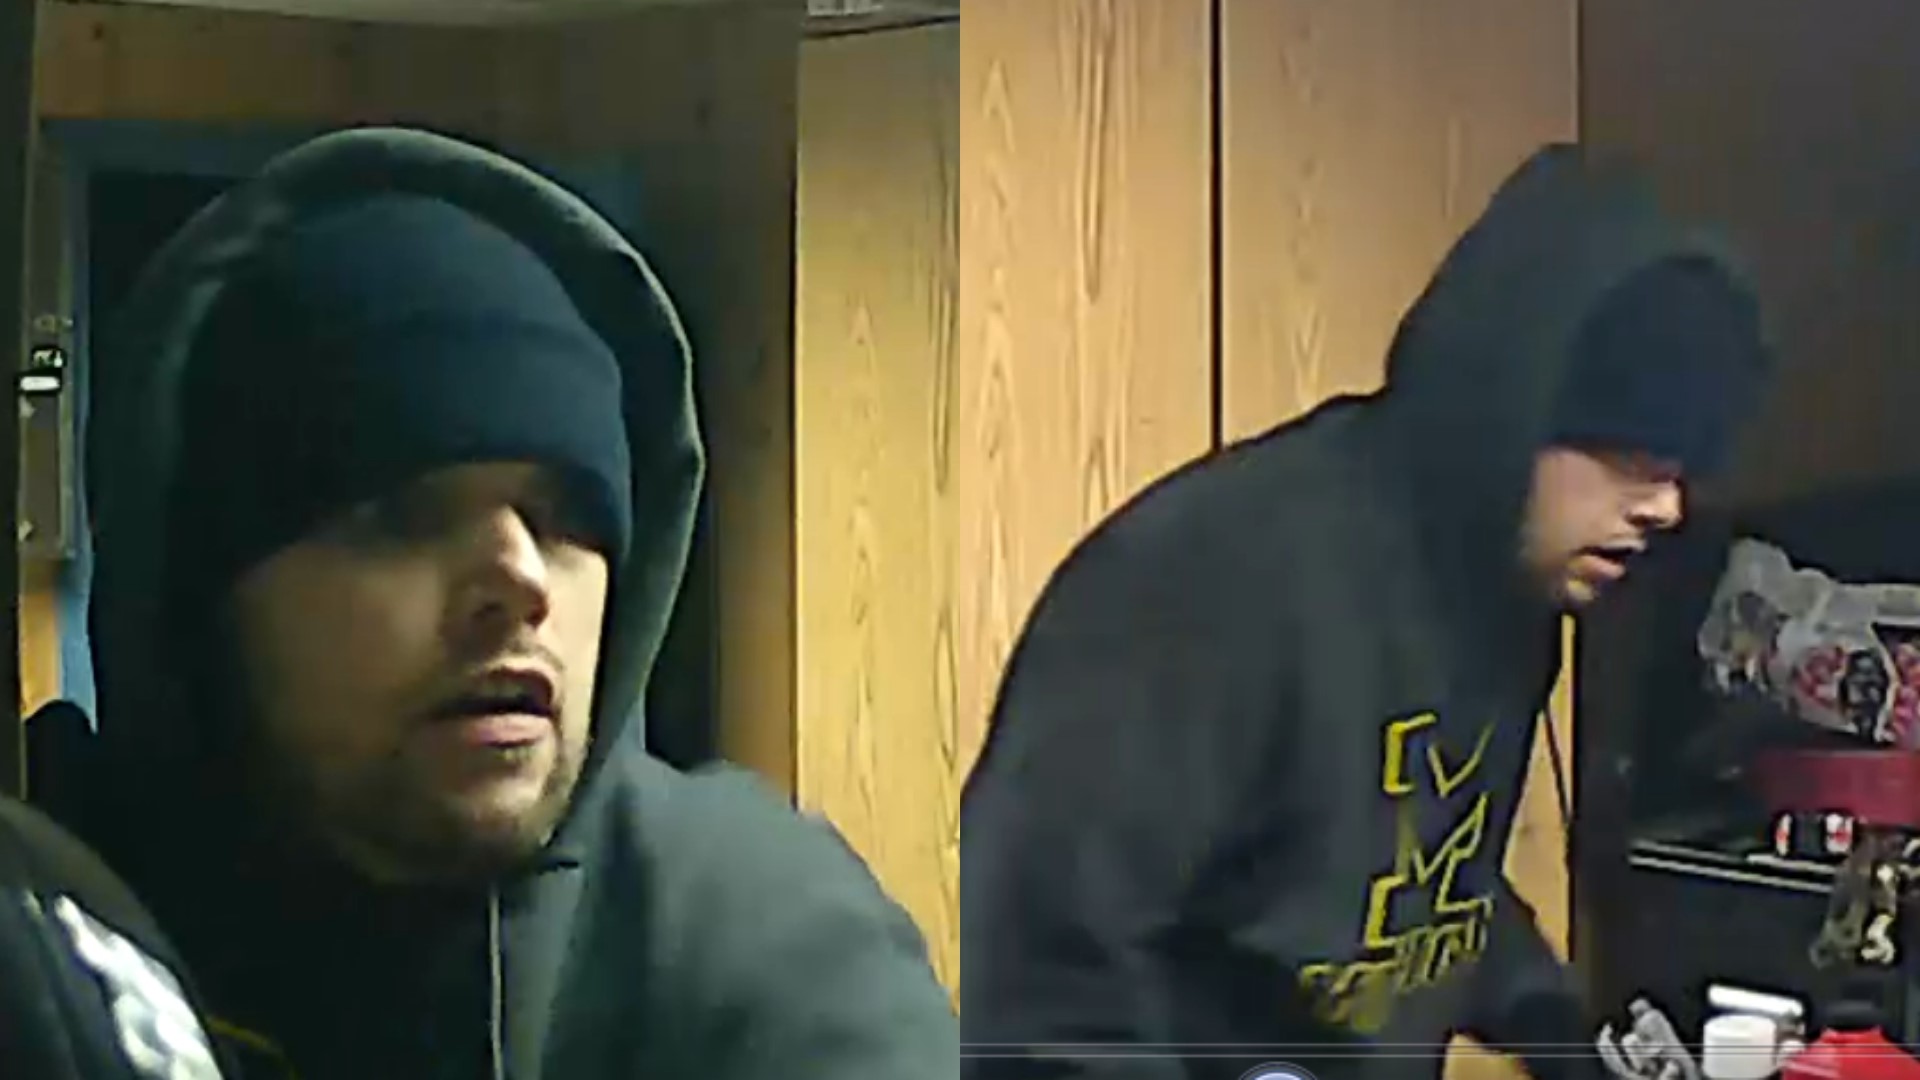 The Muskegon County Sheriff's Office release surveillance photos of a man wanted for questioning in a breaking and entering investigation. Not many other details were released at this time, but if anyone knows anything they are asked to contact the sheriff's office detective bureau at 231-724-6658 or Silent Observer at 231-72-CRIME.